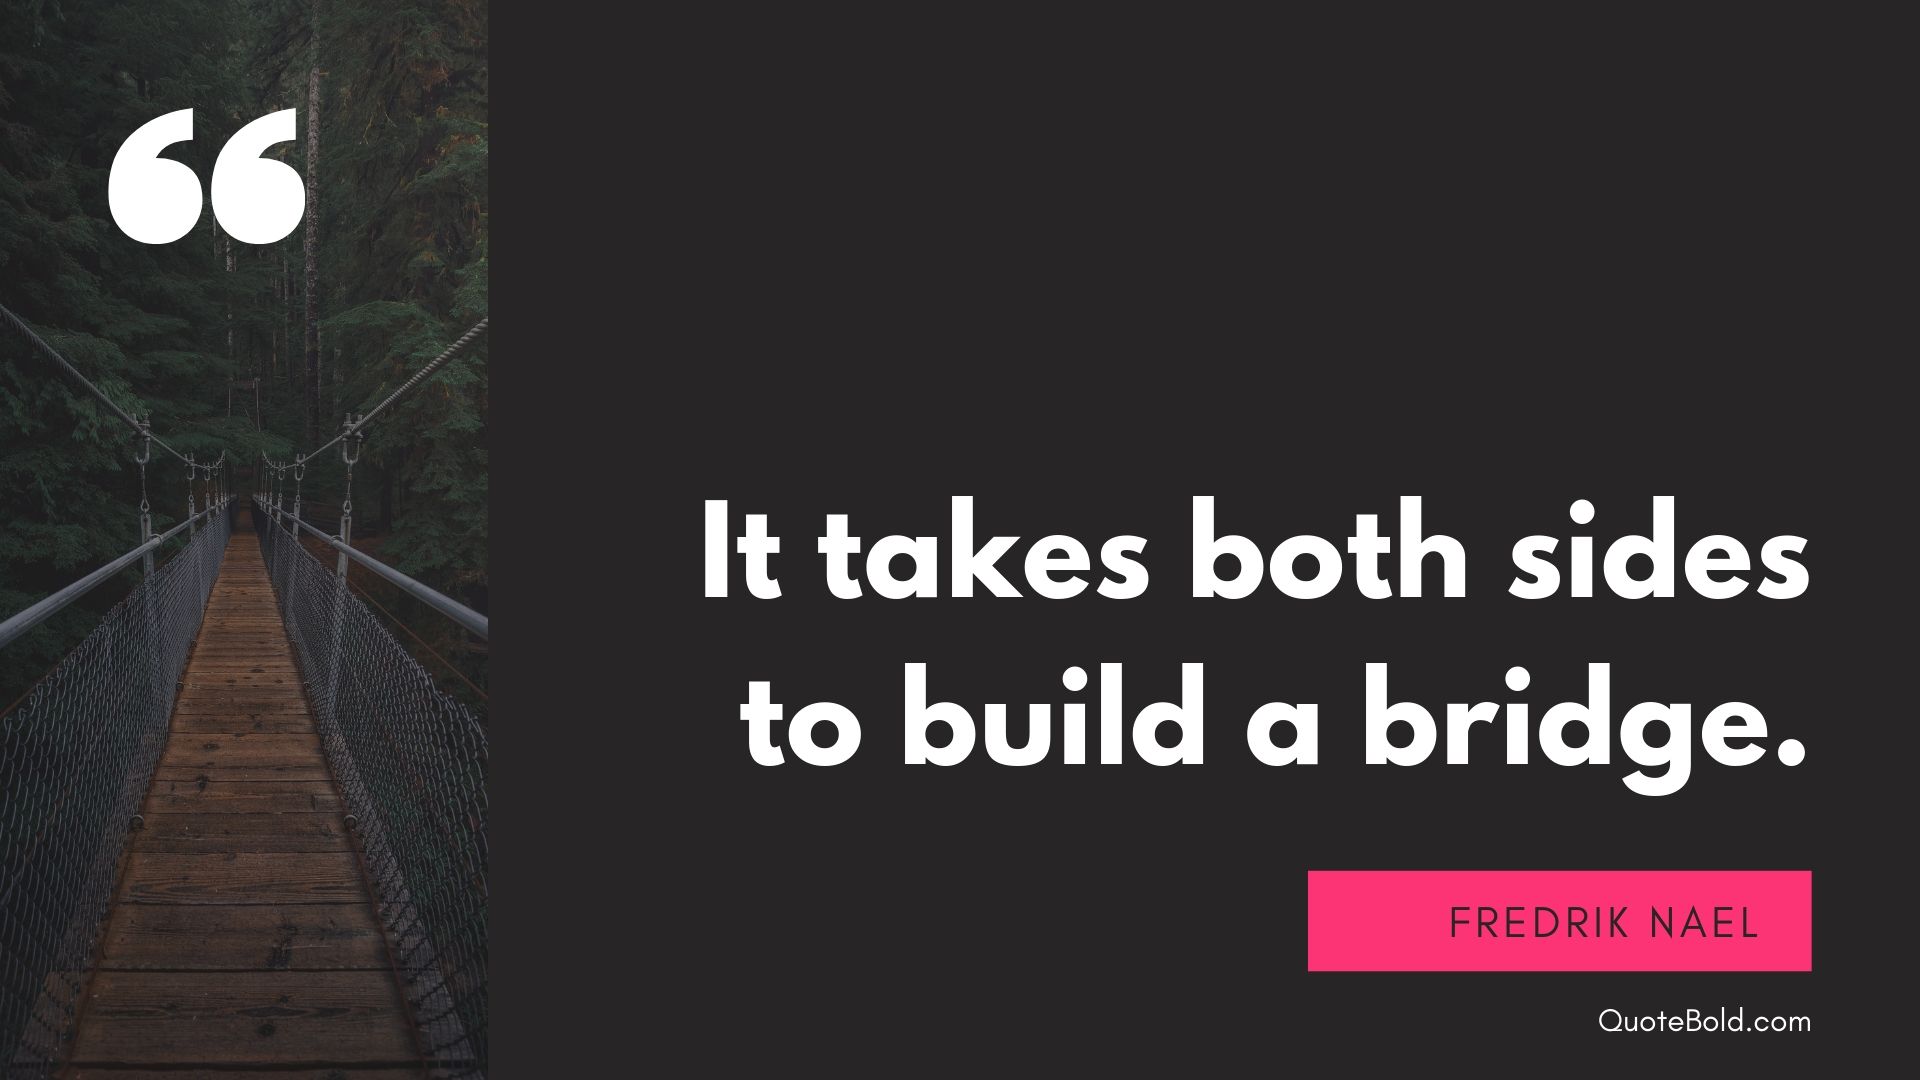 85+ Famous Teamwork Quotes [Shareable Images] | QuoteBold